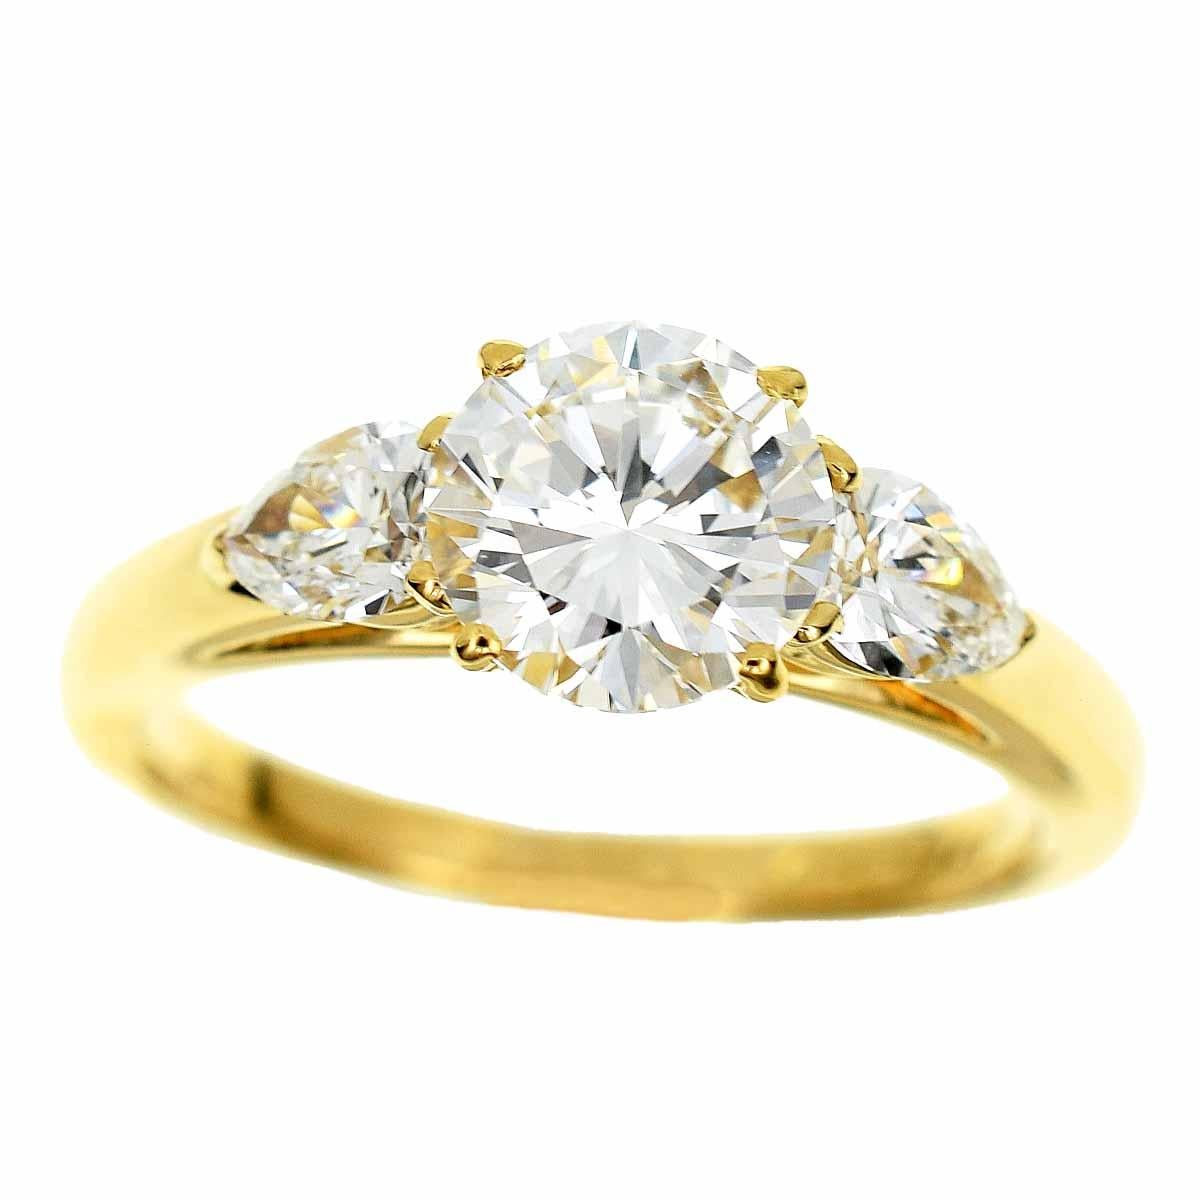 Brand:Cartier
Name:Diamond Ring
Material:1P diamond (1.01ct D-VS1-VG), 2P side diamond, 750 K18 YG yellow gold
Weight:3.5g（Approx)
Ring size:EU48.5 / US 4 3/4
Width(inch):2.20mm / 0.08in（Approx)
Main stone size:6.50-6.63×3.88mm
Comes with:Cartier